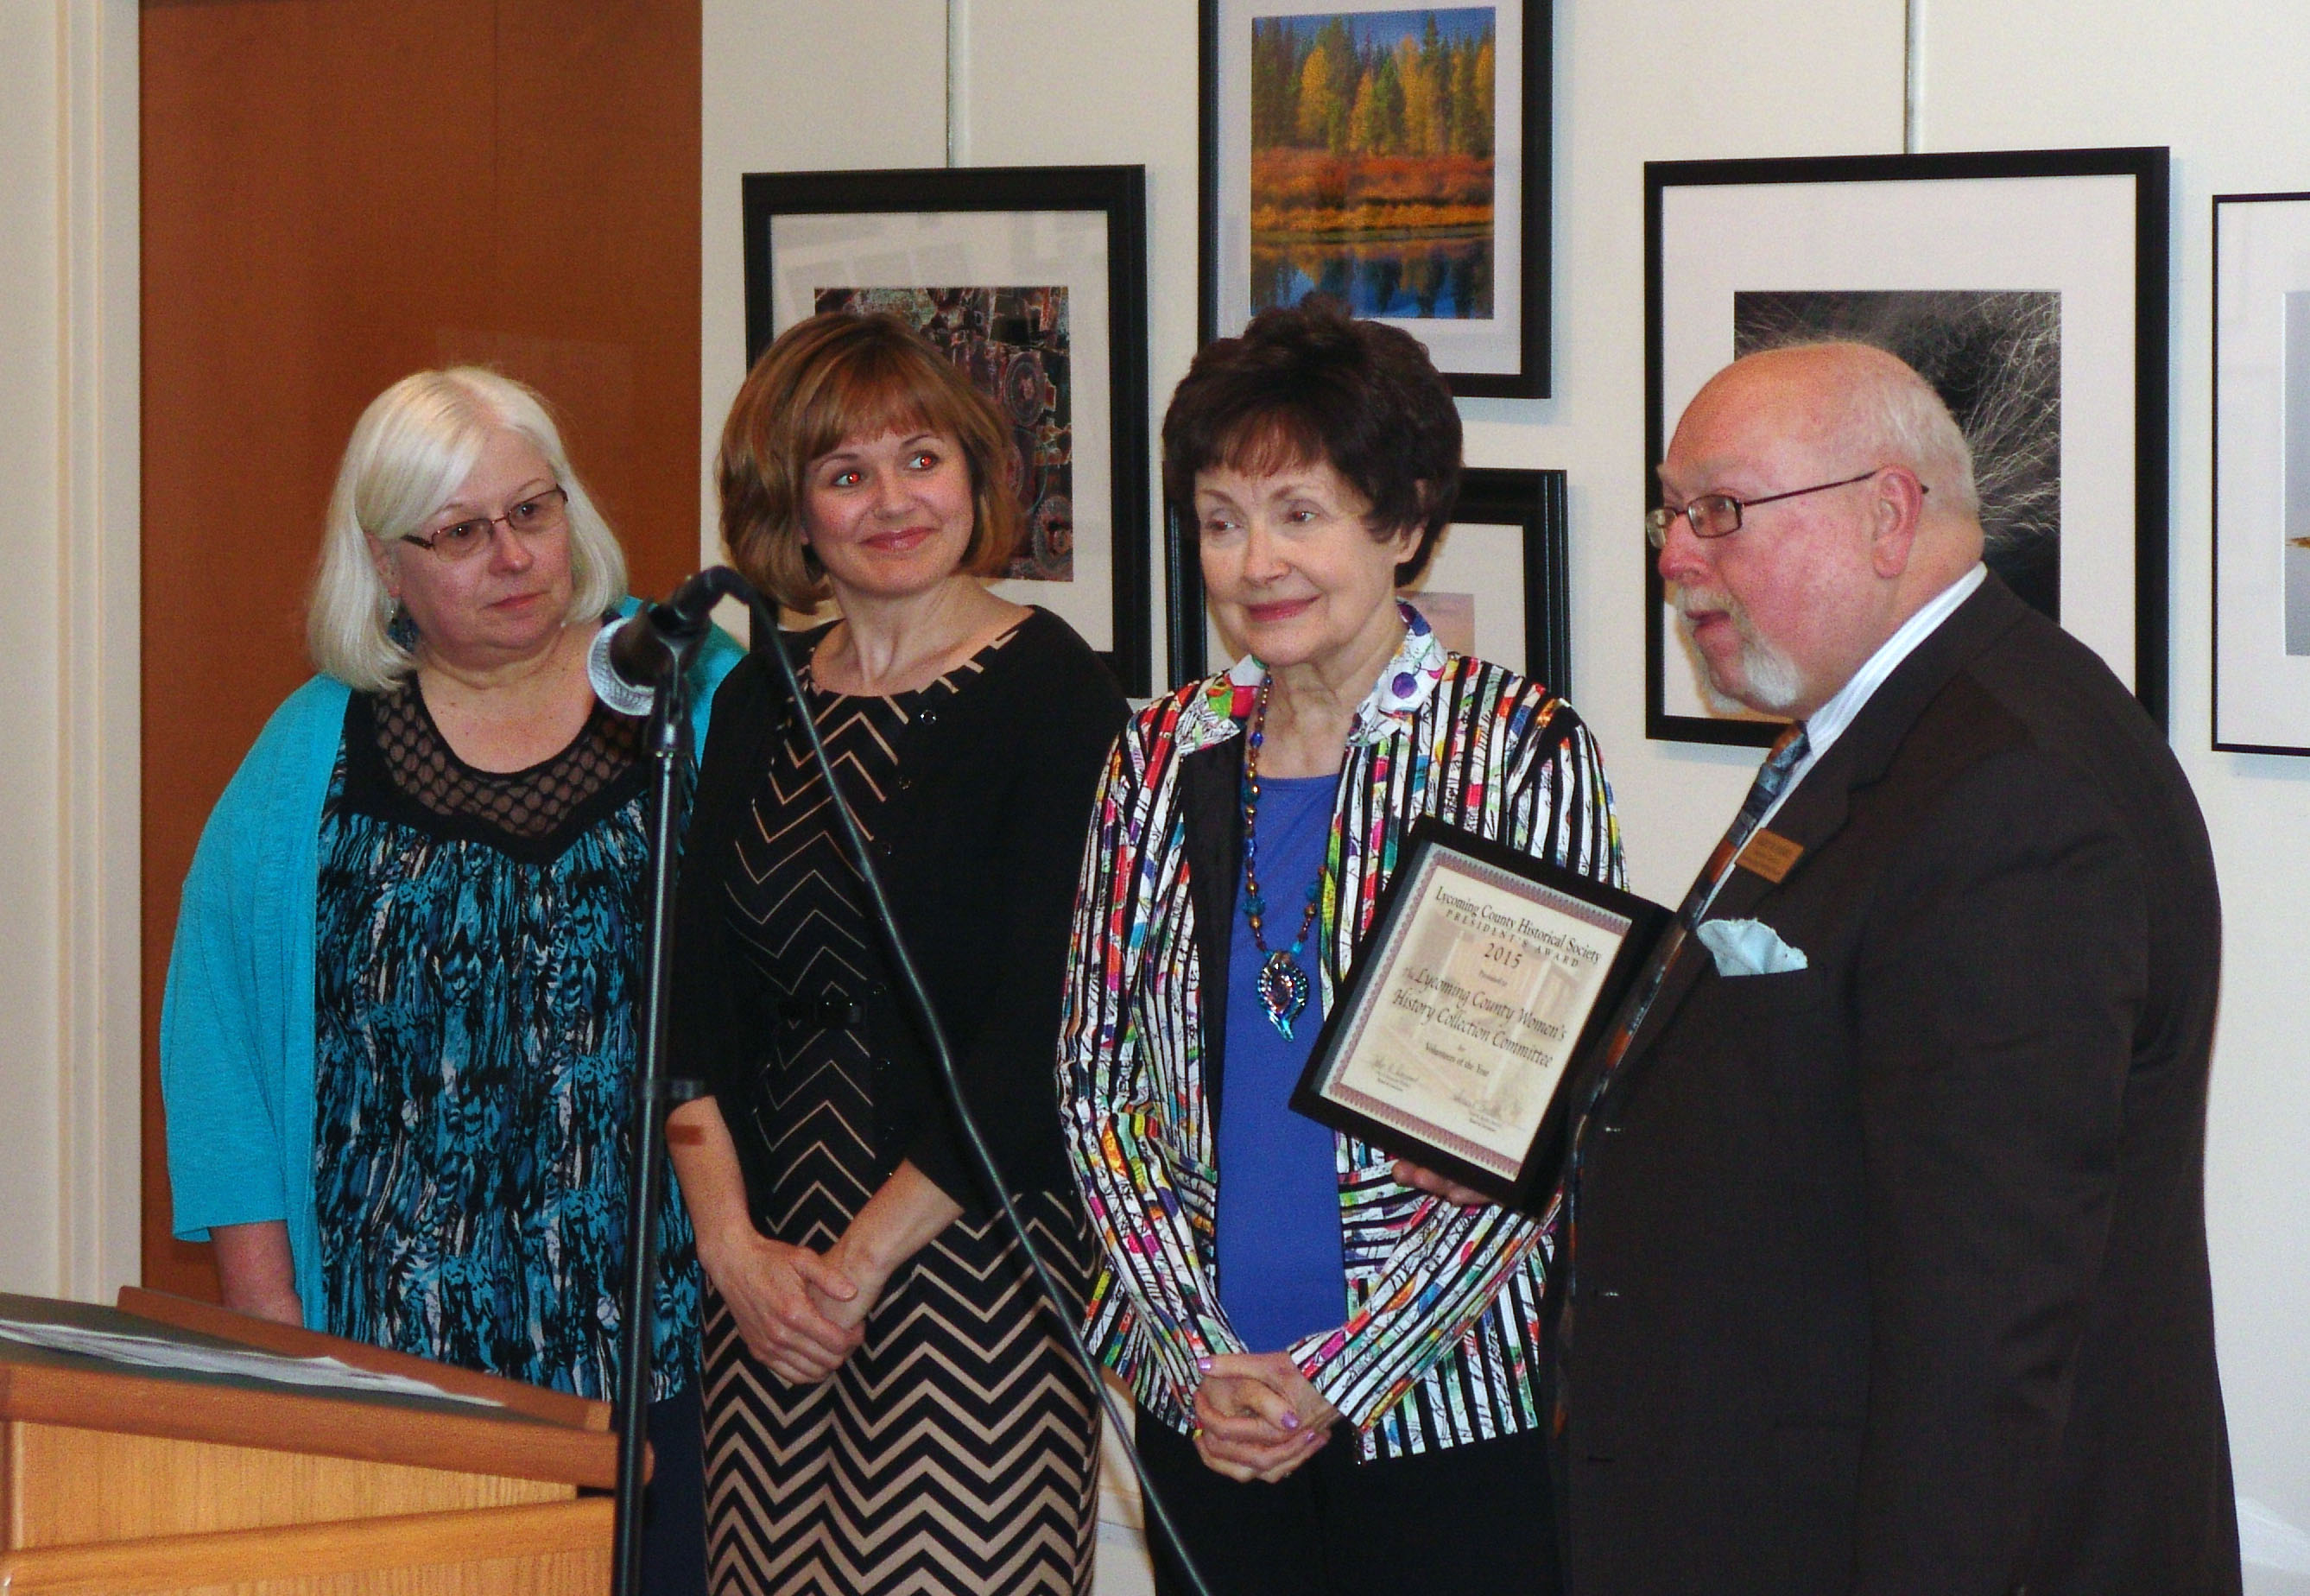 Director Gary Parks presenting the Volunteer of the Year Award to representatives of the Lycoming County Women’s History Collection Committee; from left: Helen Yoas, Alison Gregory, Janet Hurlbert